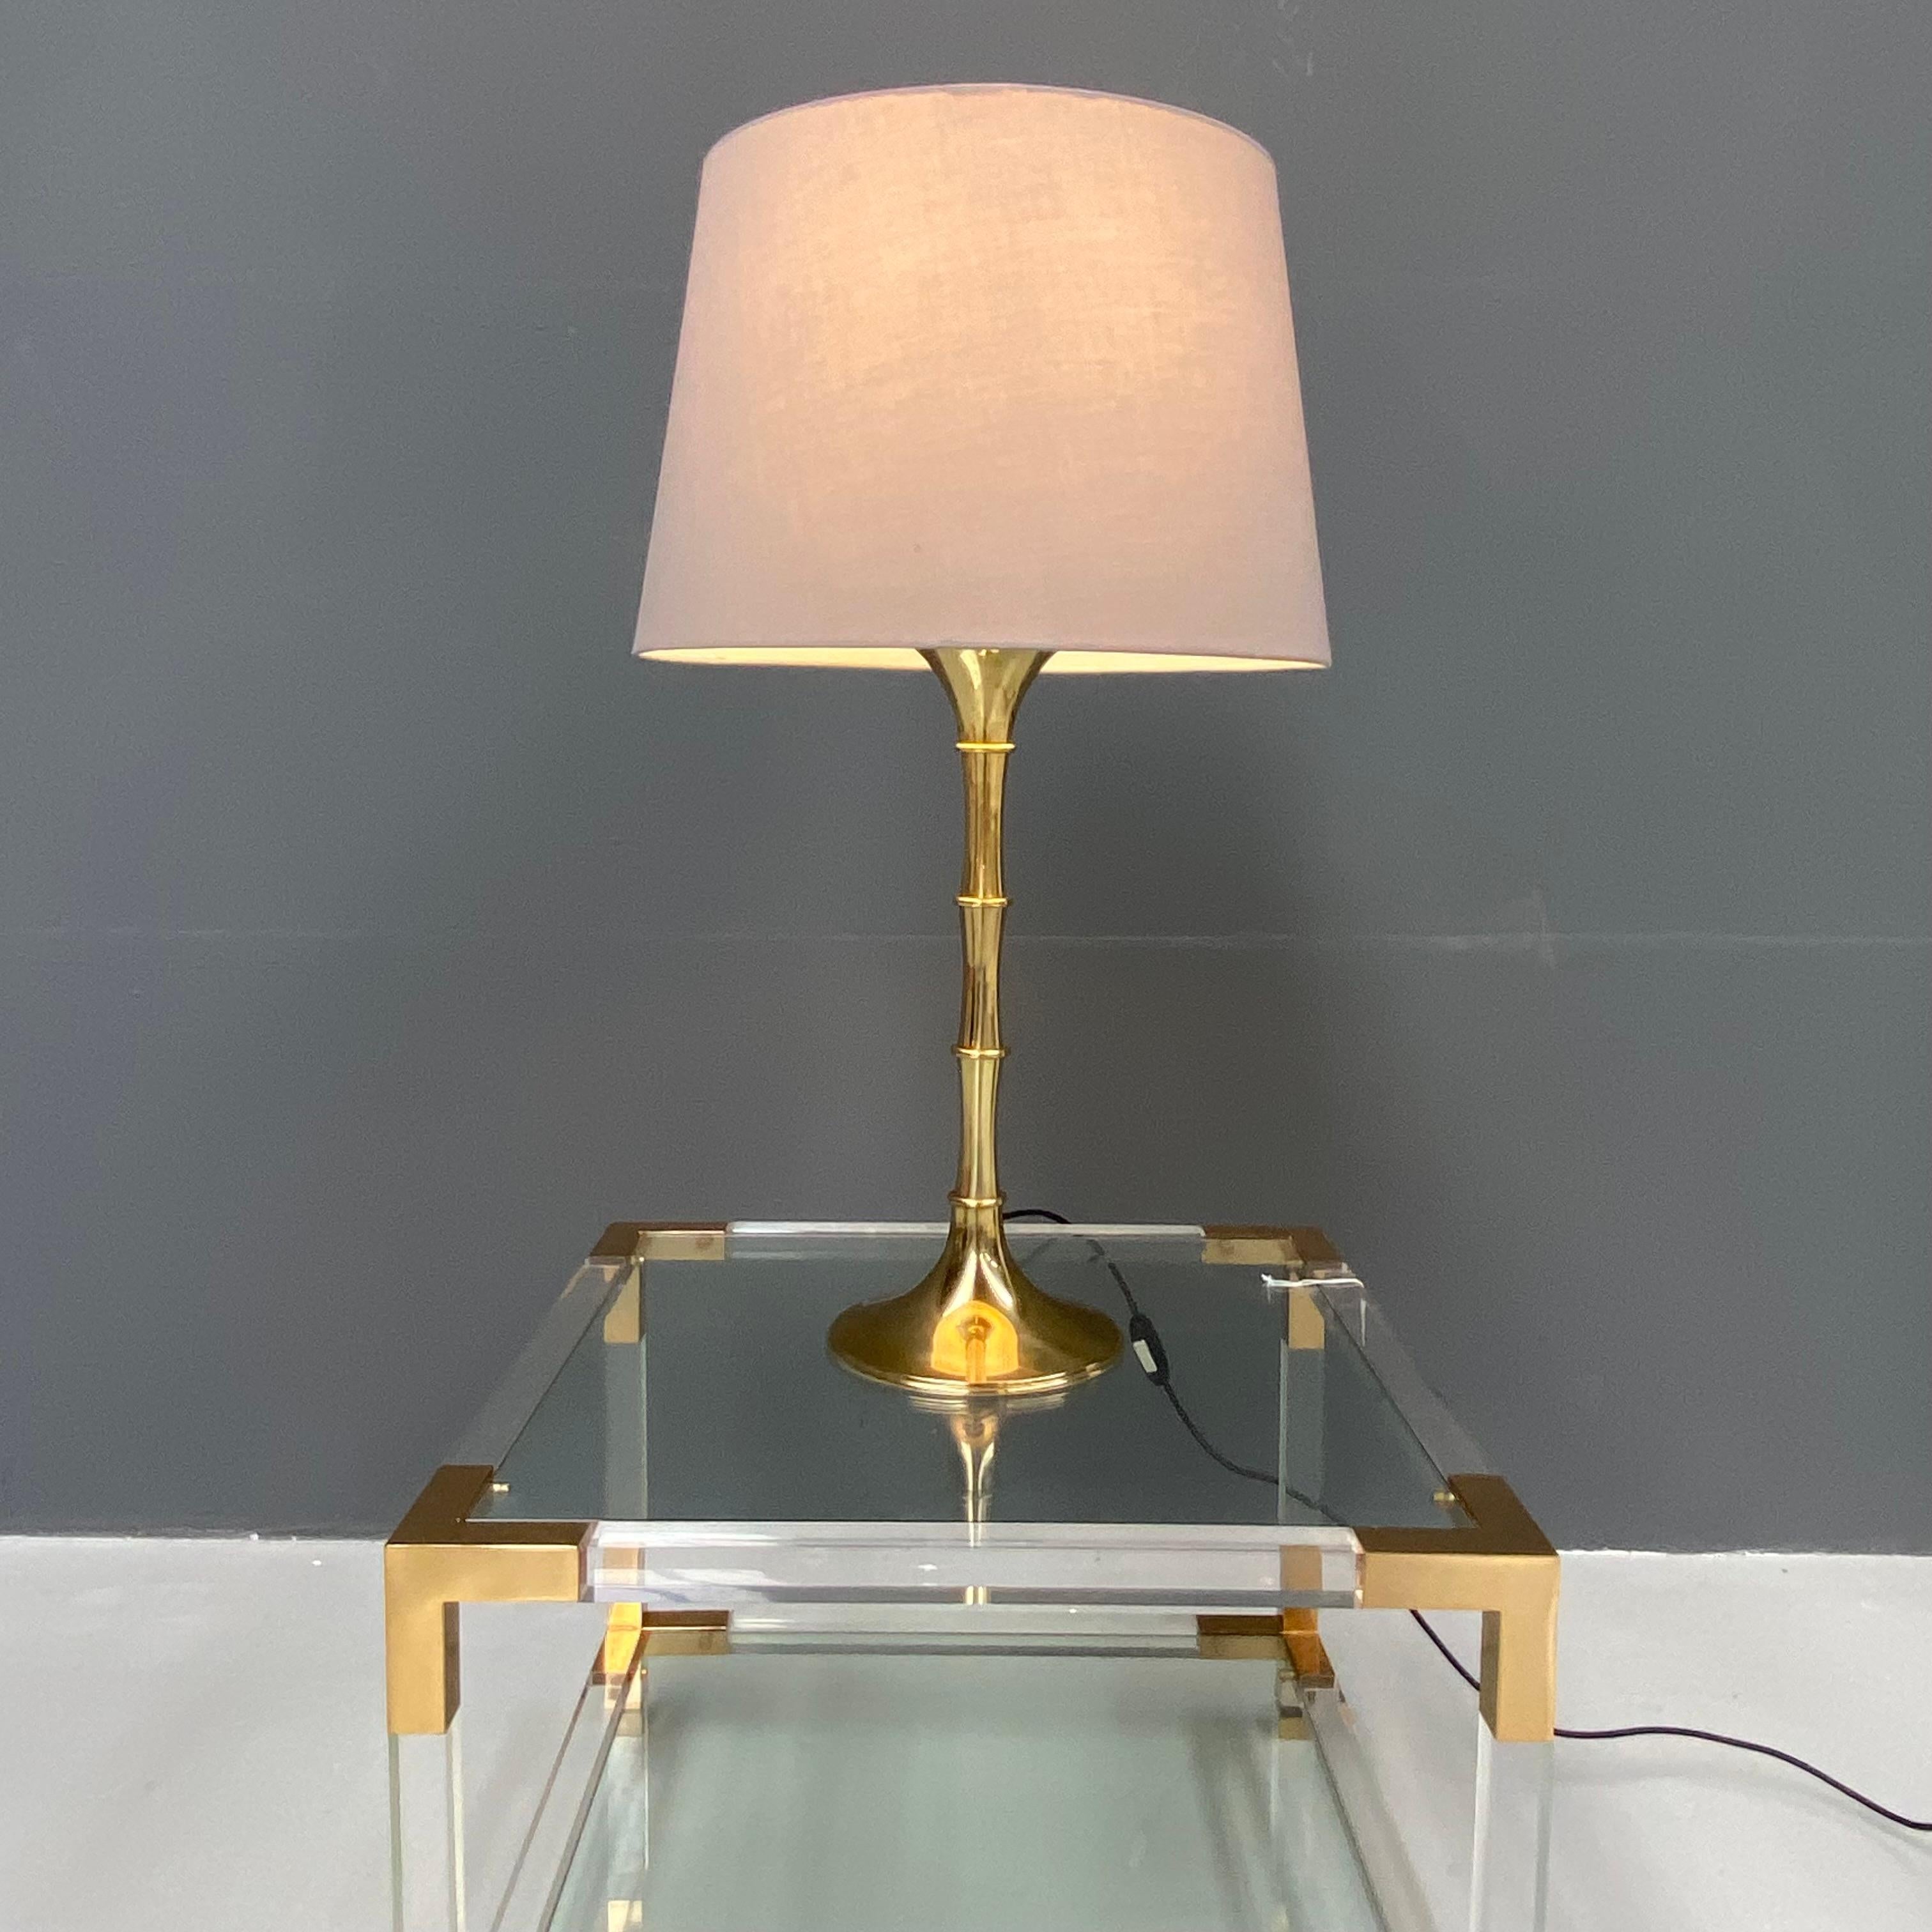 Vintage Bamboo Table Lamp in Brass by Ingo Maurer for M Design, 1960s. For Sale 4